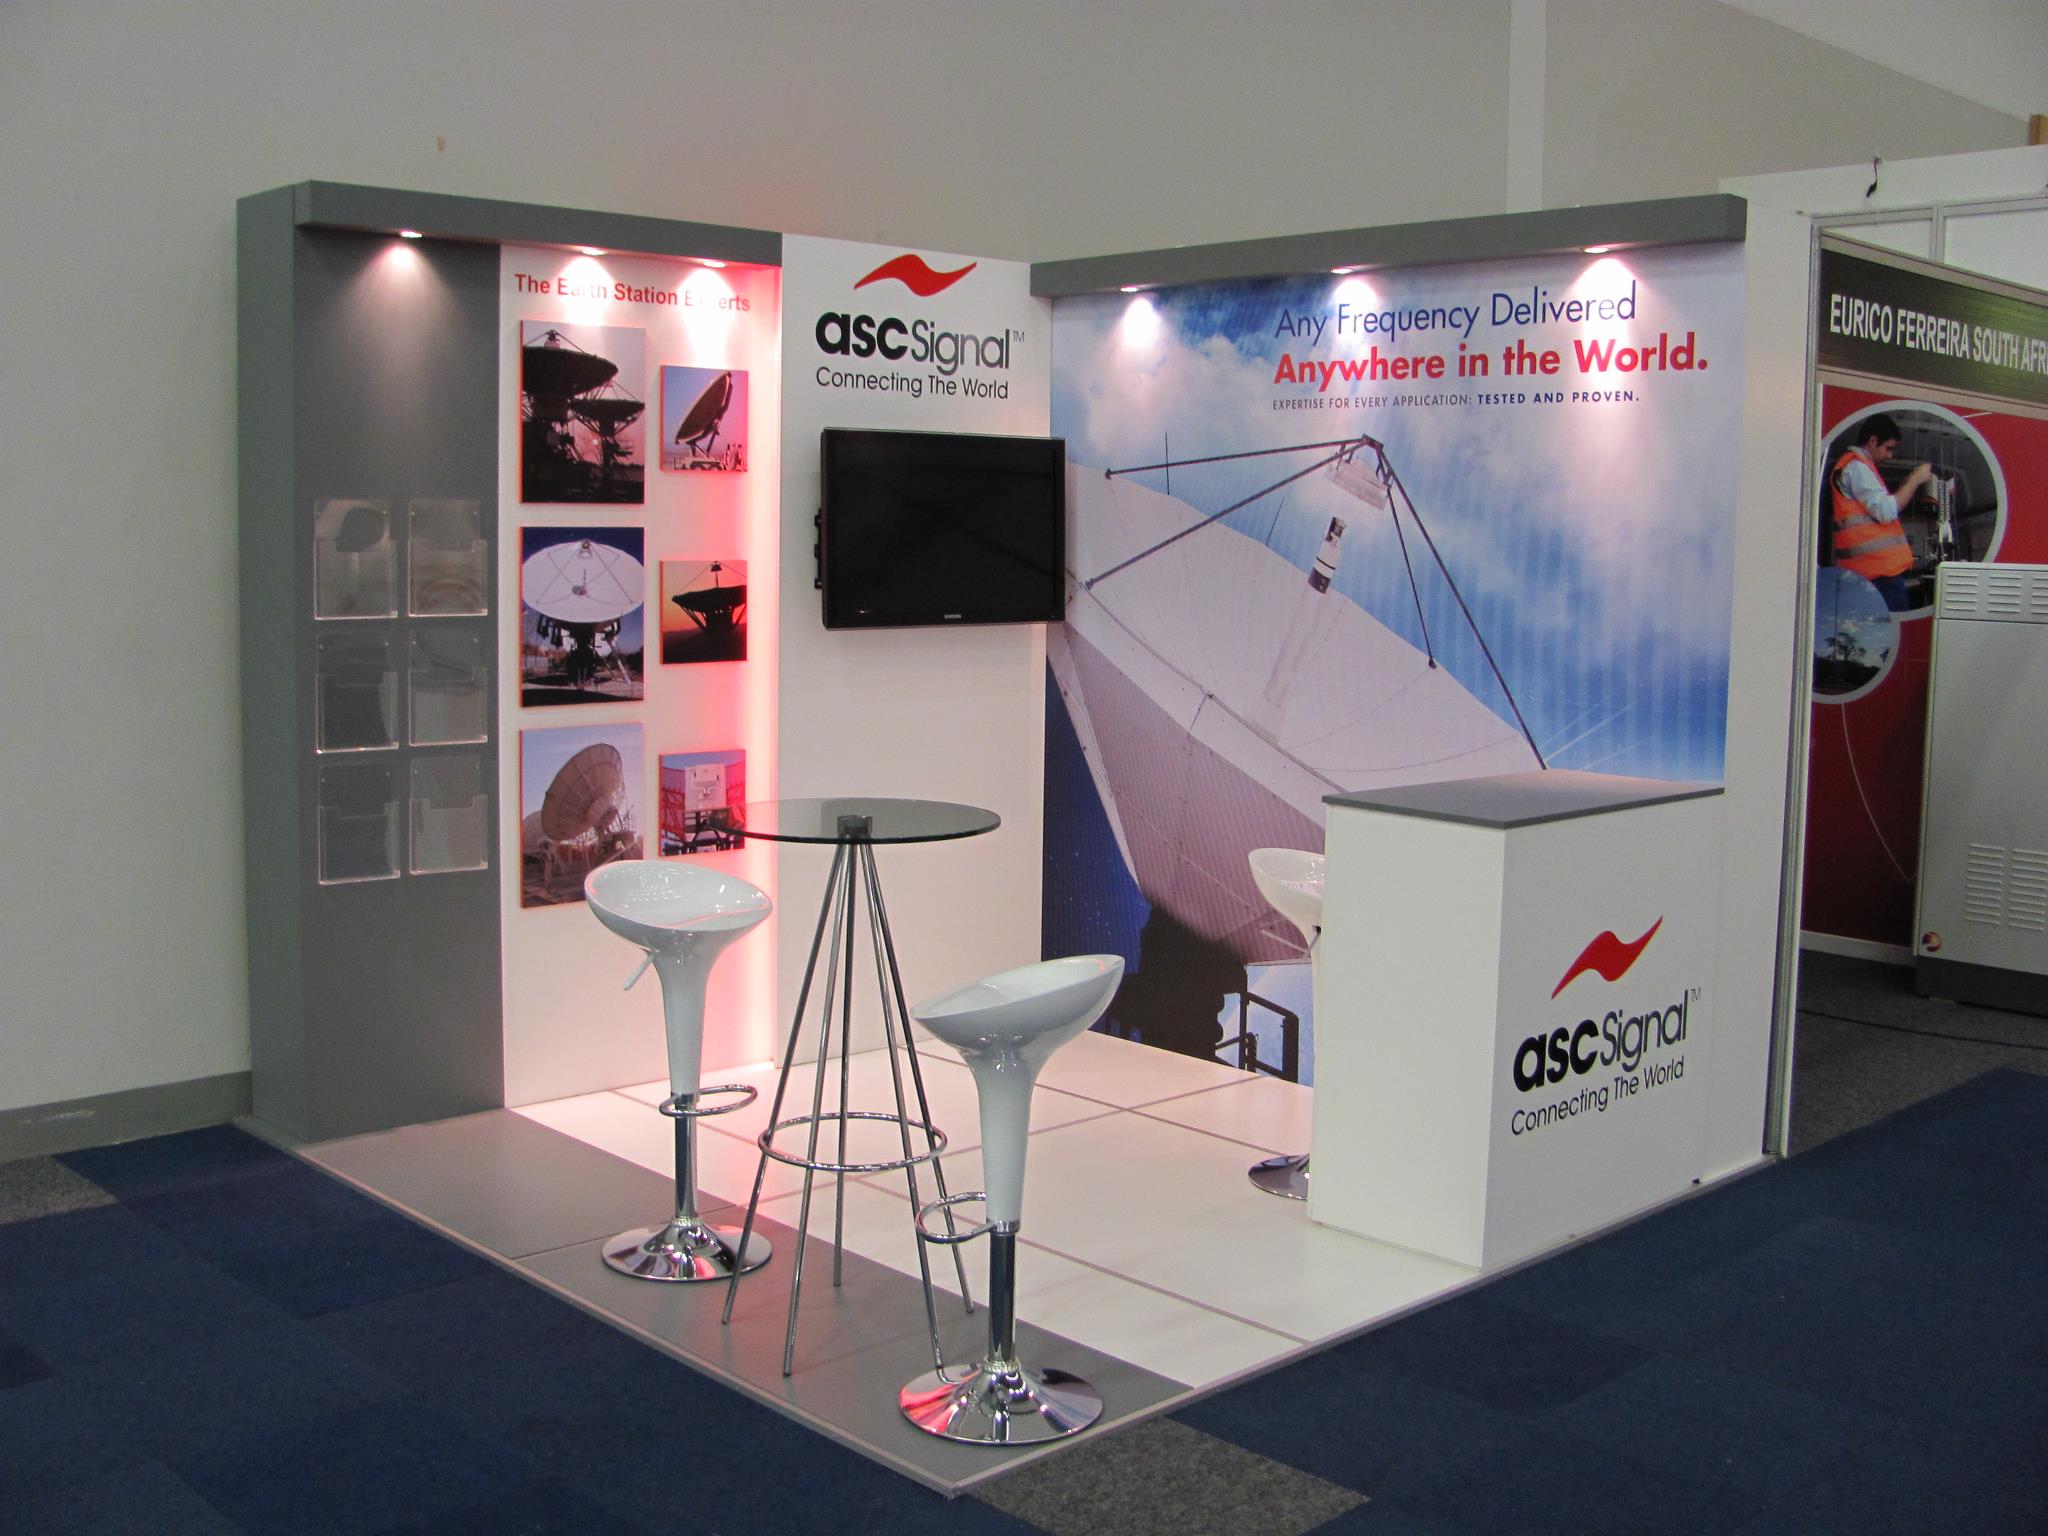 asc signal exhibition stand